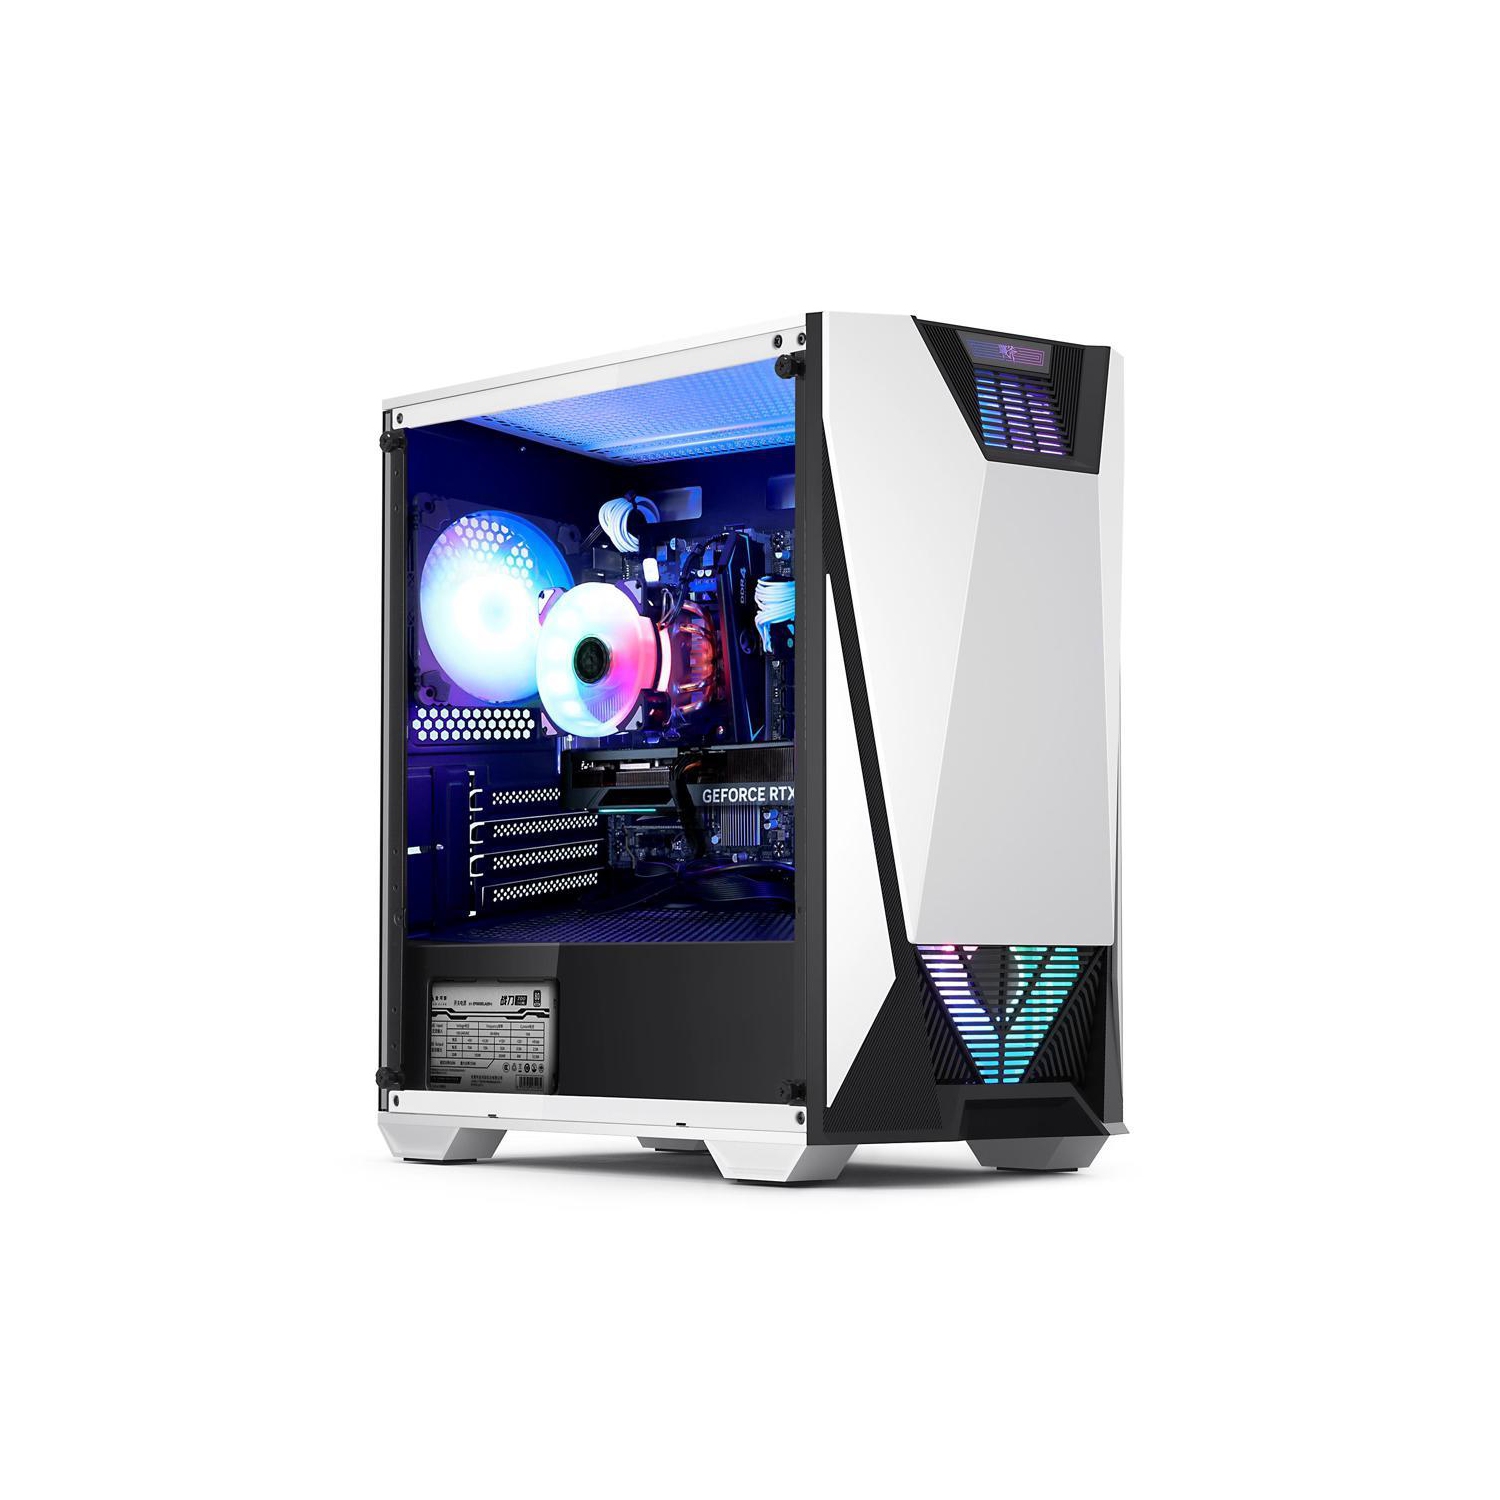 Hoengager Battleaxe Gaming - Intel Core i5-12600K 10-Core 3.7GHz-NVIDIA GeForce RTX 3060 Ti- 32GB DDR4 3200MHz - 500GB M.2 NVMe SSD- WIFI -RGB Fans - Windows 11 Pro Computer